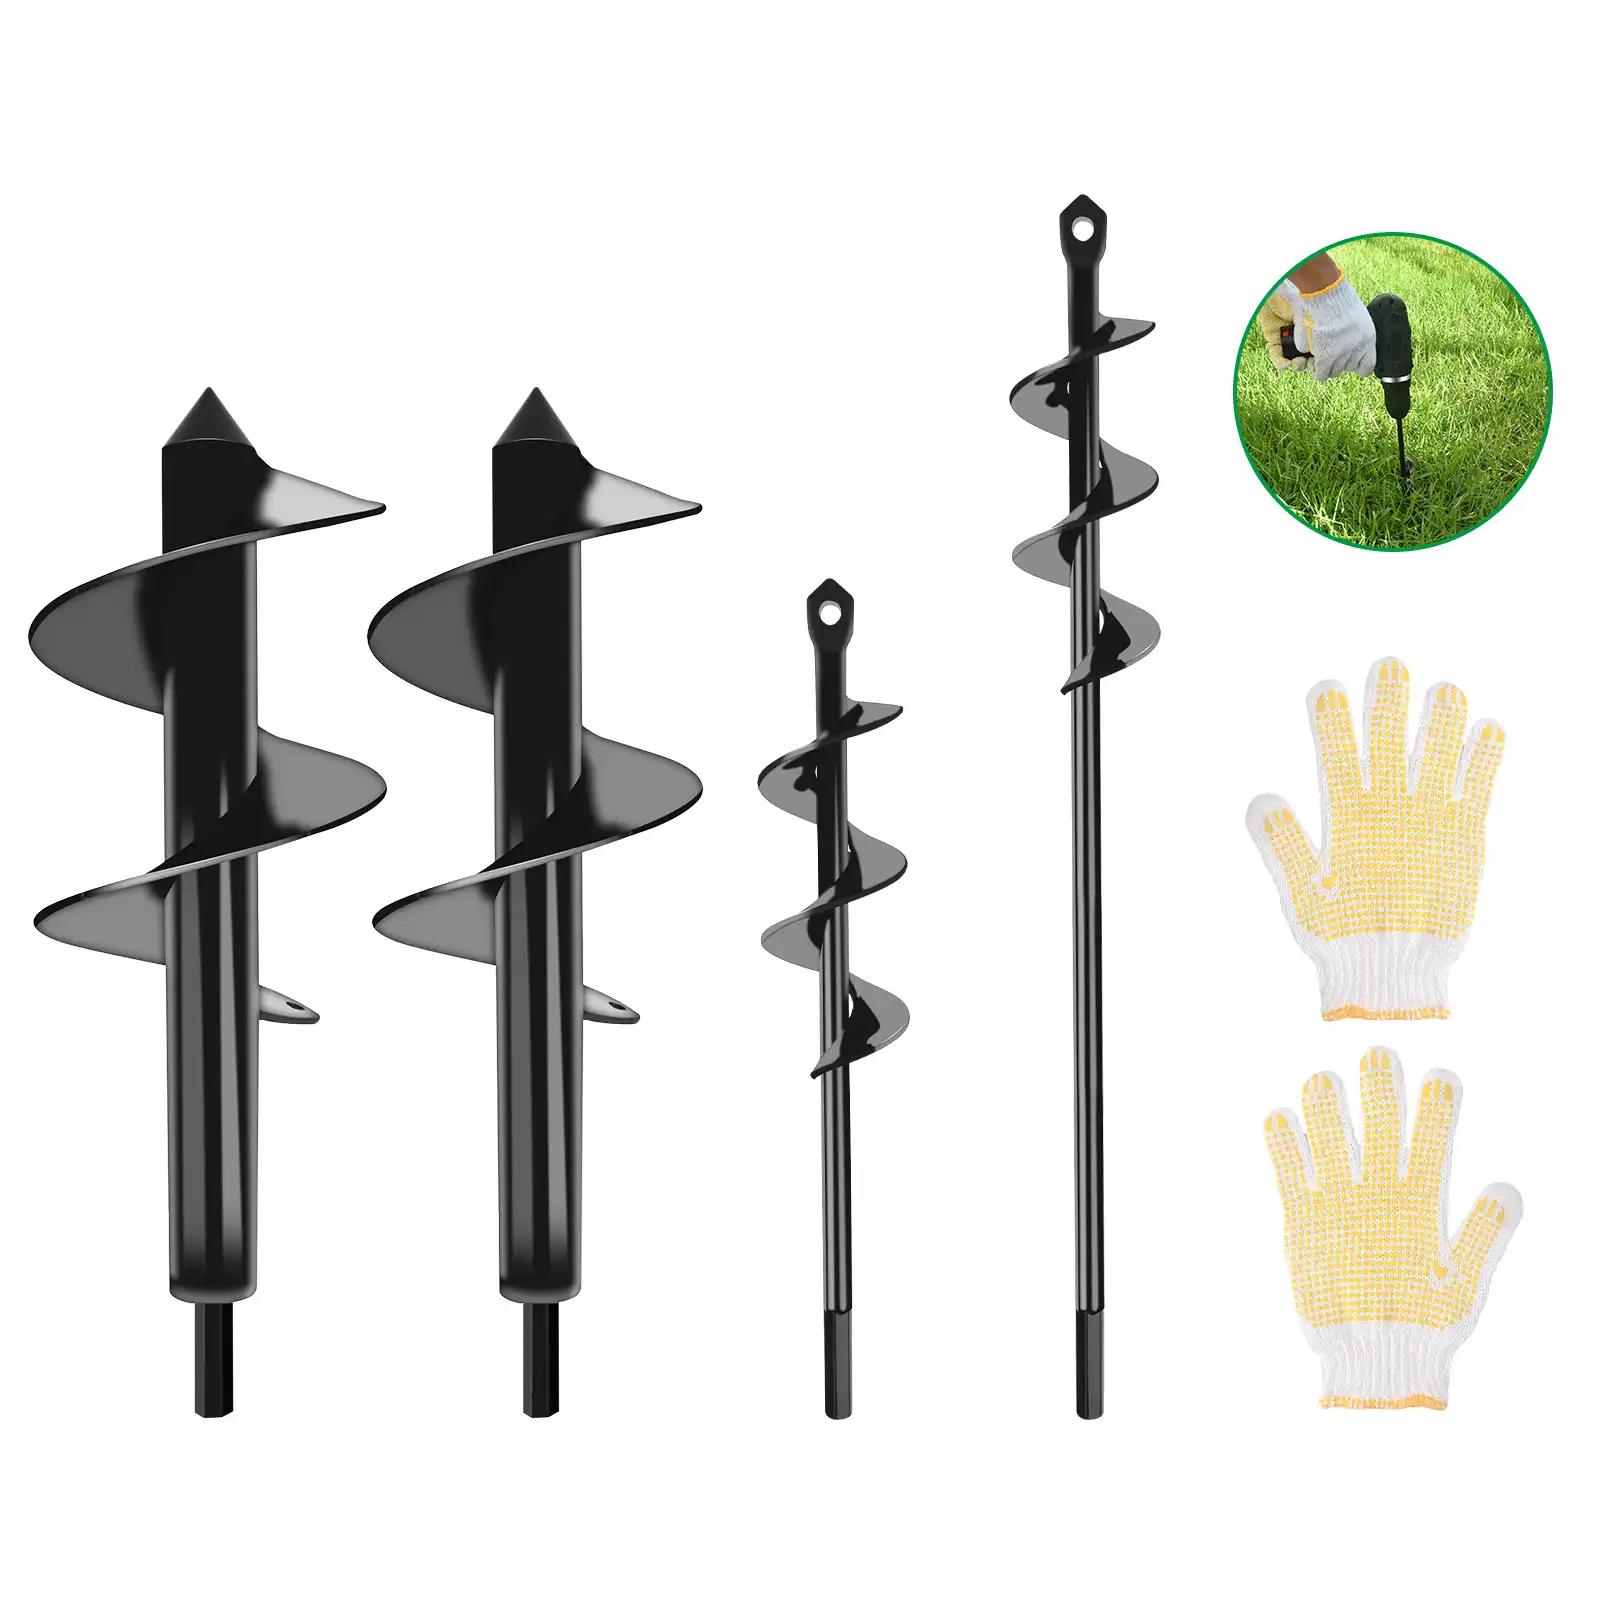 Garden Auger Drill Bit for Planting 4x24in Plant Flower Bulb Garden Auger Spiral Hole Drill Bit Earth Auger Post Umbrella Hole Digger for 3/8 Hex Drive Drill Earth Auger Bit Standing Work to Drill 